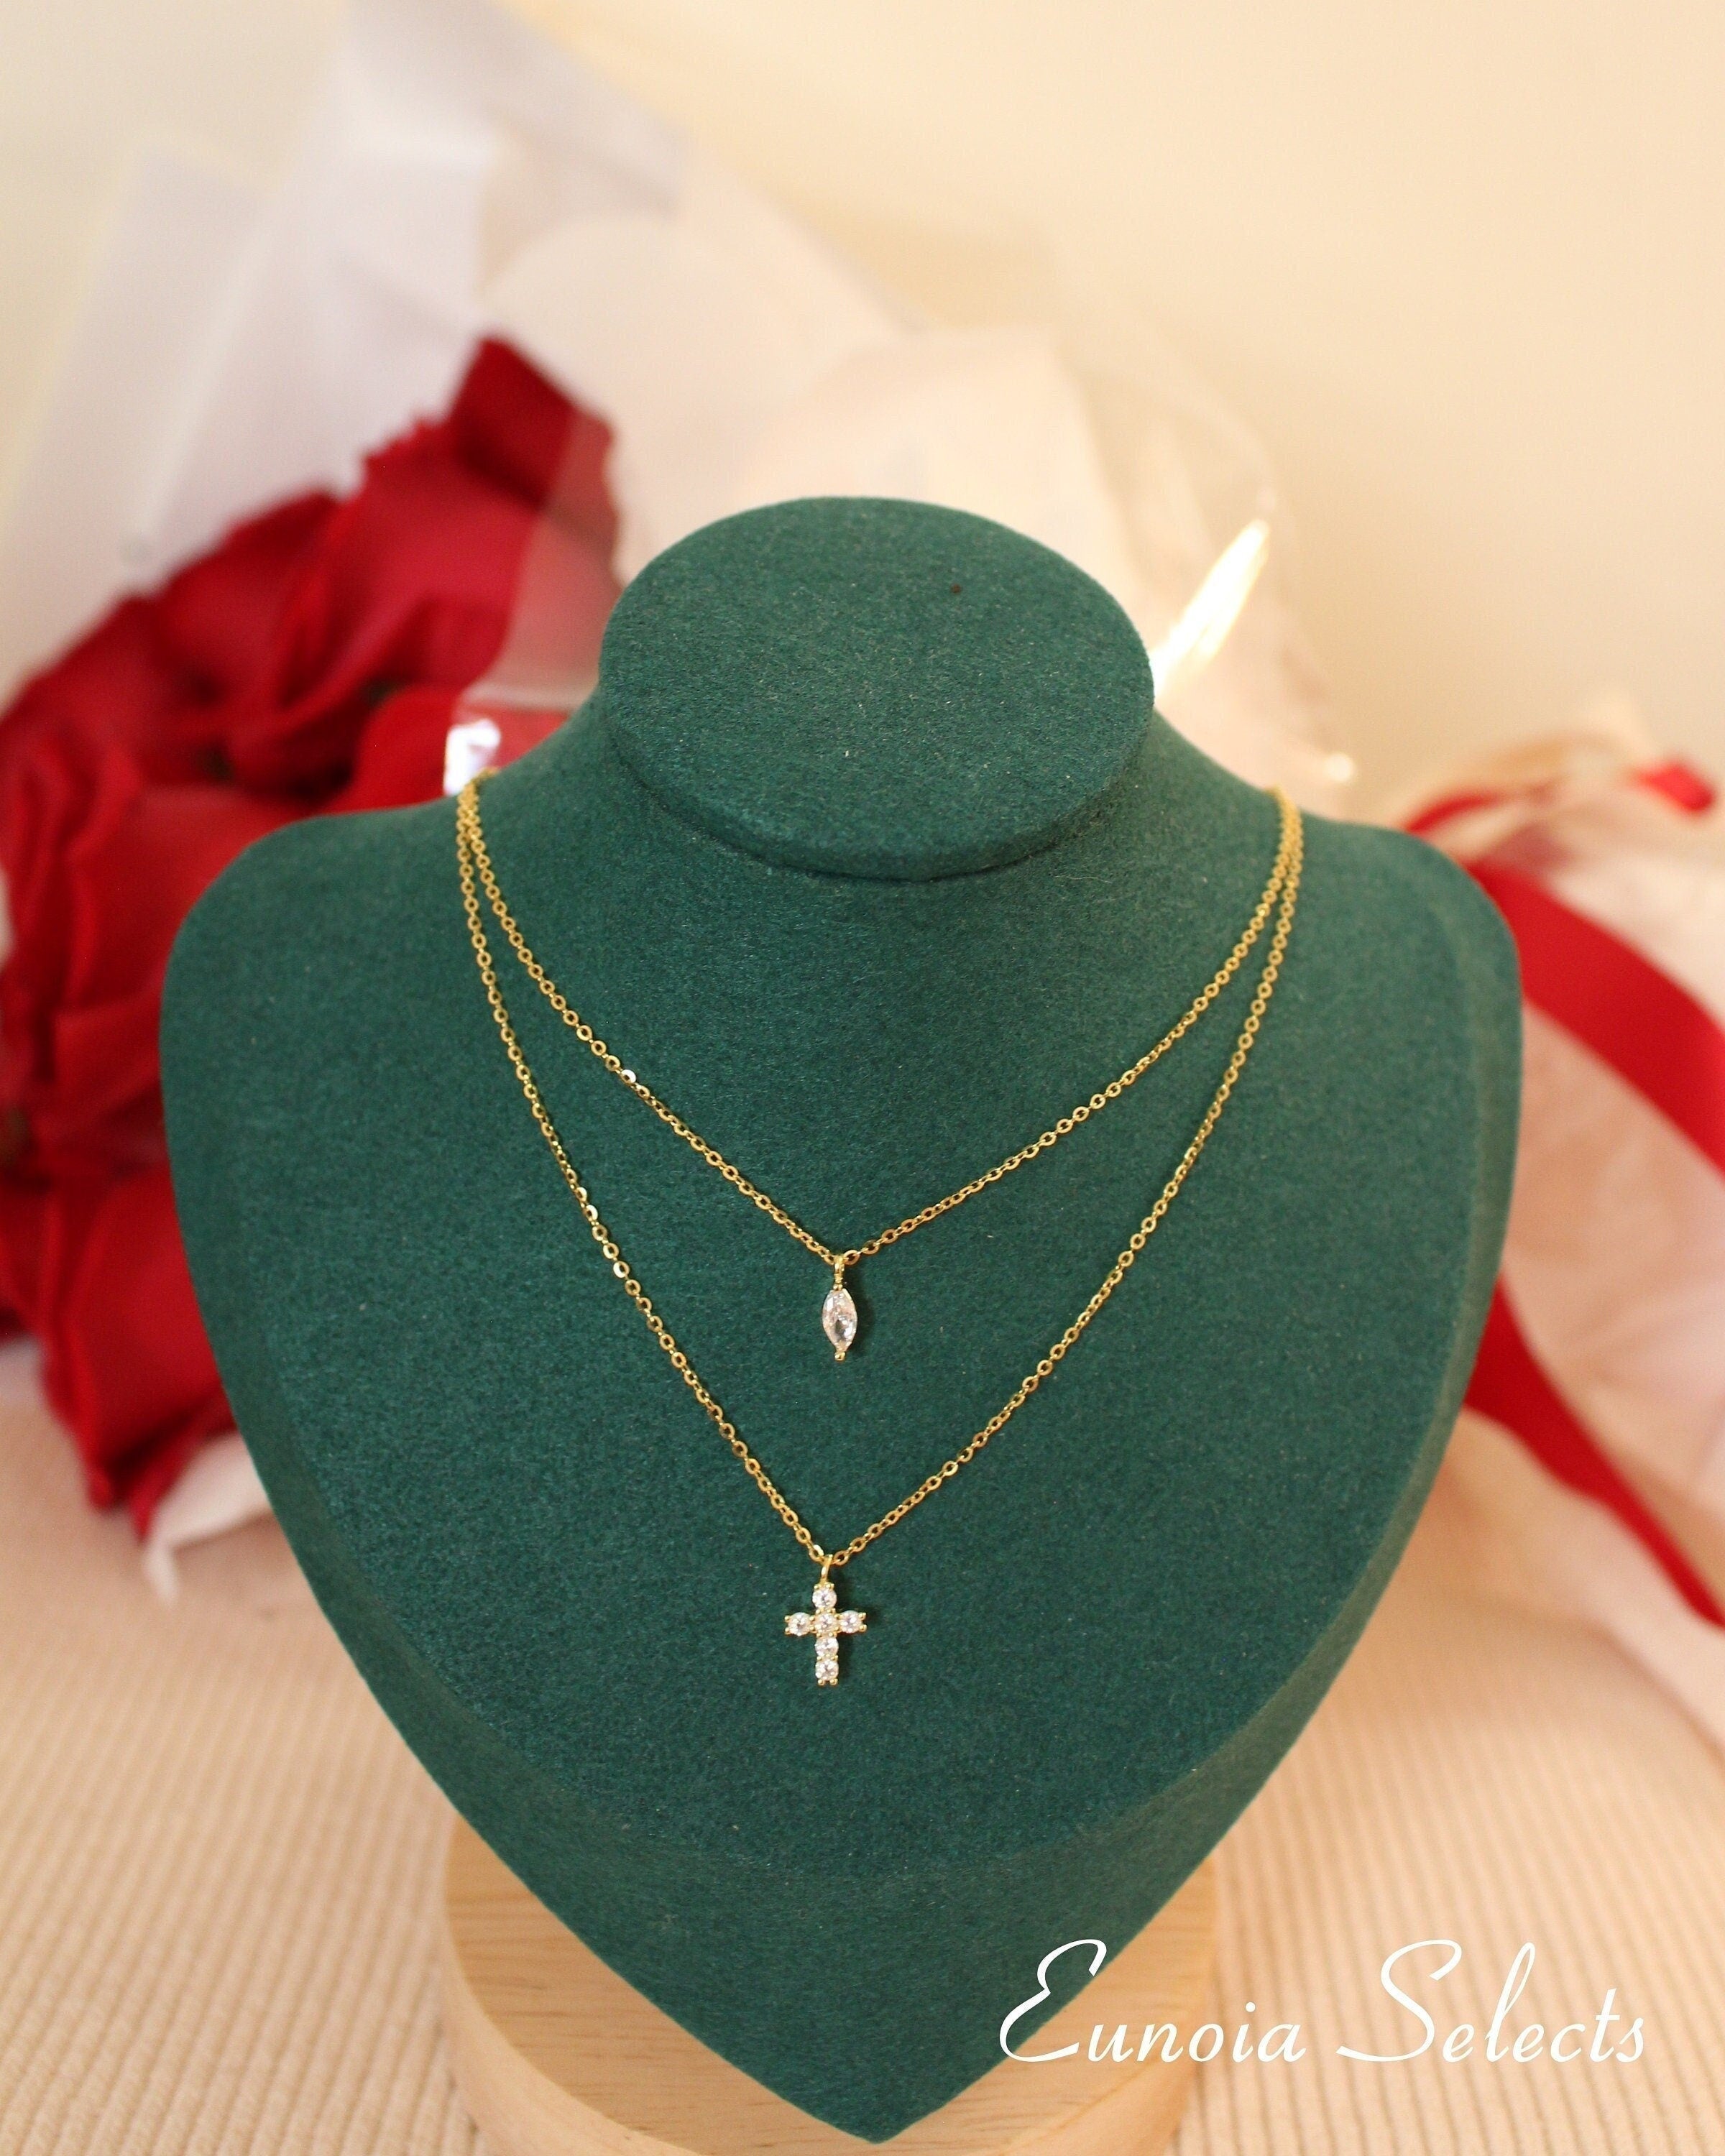 Cross Necklace Baptism Gifts girl women Christening religious cross Necklace  | eBay